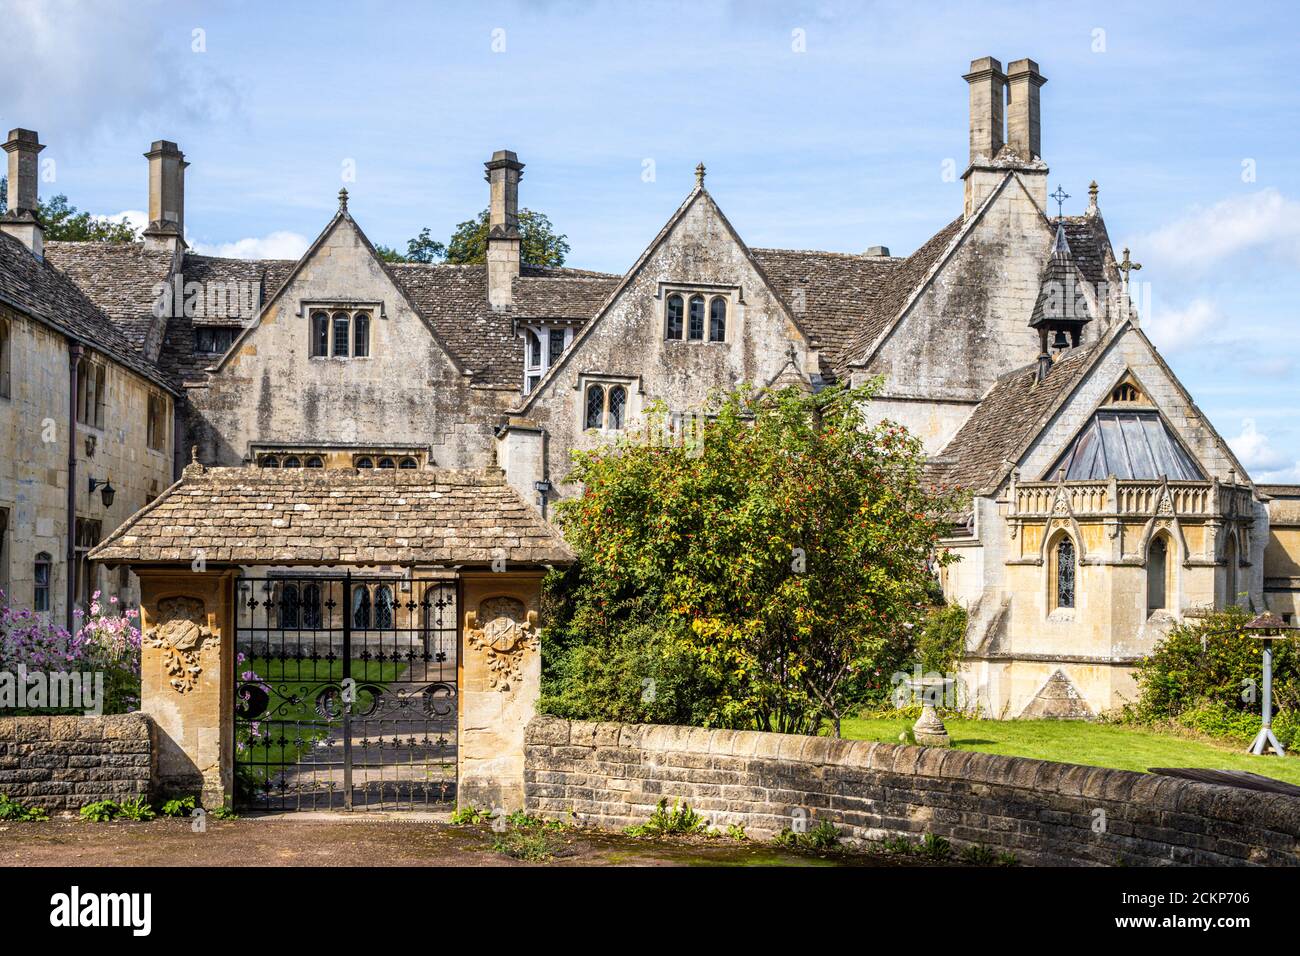 Prinknash Abbey, now located in St Peters Grange, a 15th century building on the Cotswolds near Upton St Leonards, Gloucestershire UK Stock Photo